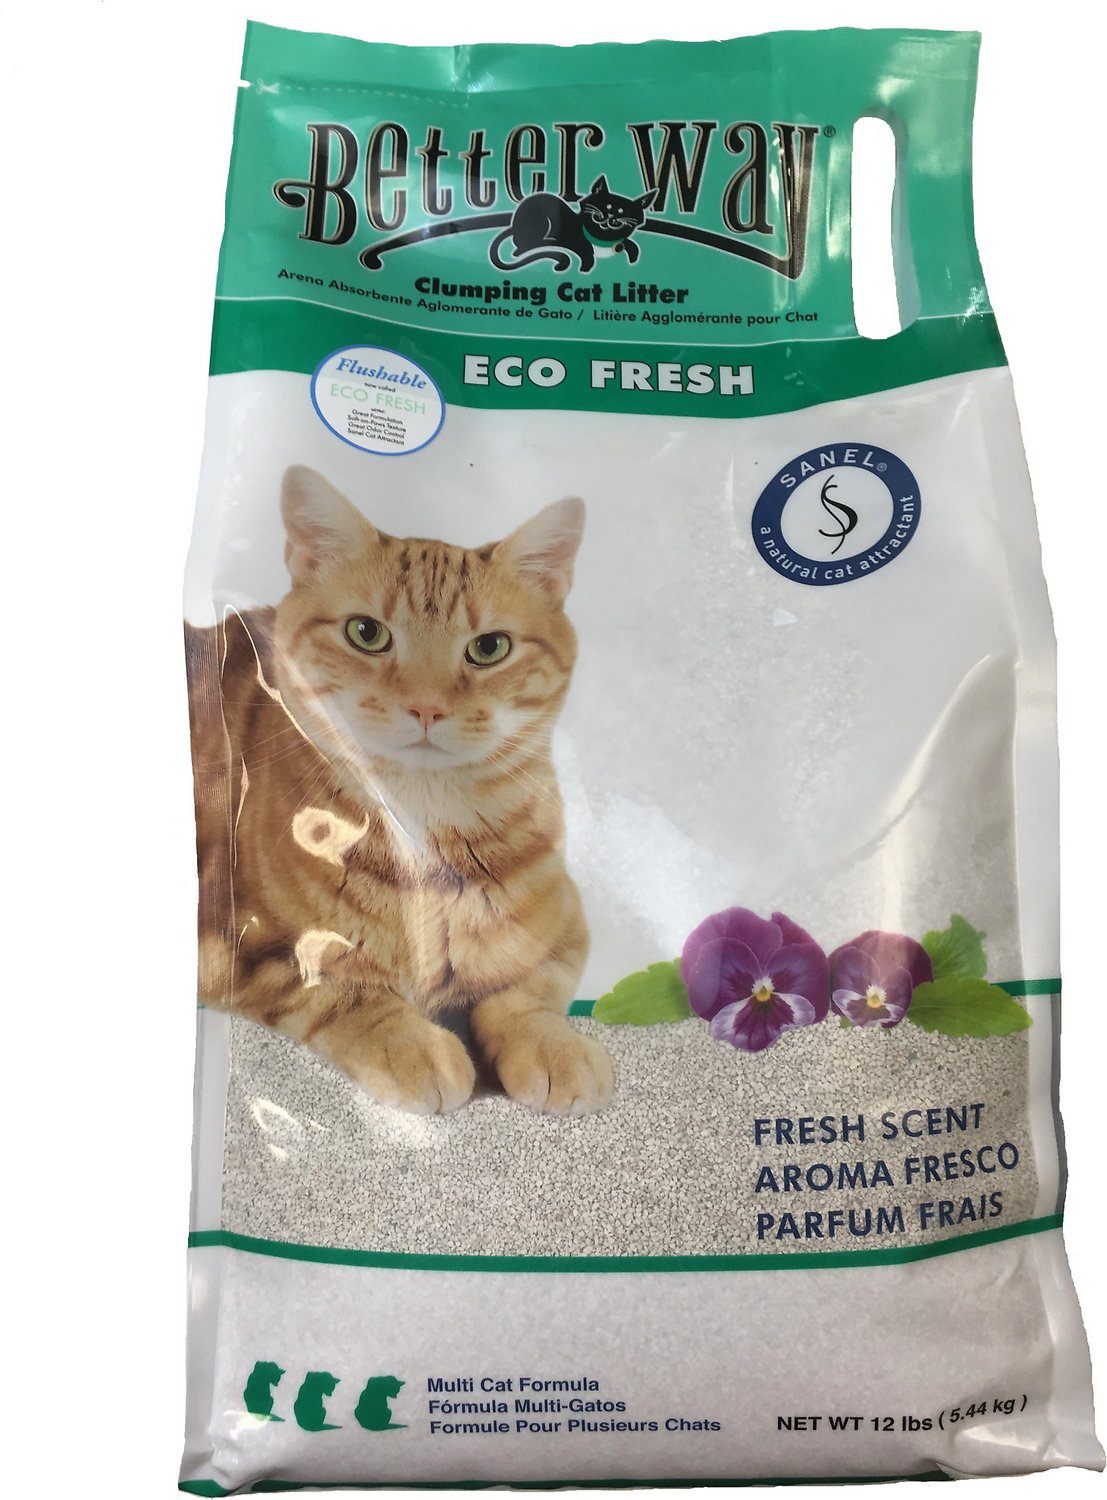 The Best Cat Litter Brands of 2018 Reviews, Ratings, & Comparisons